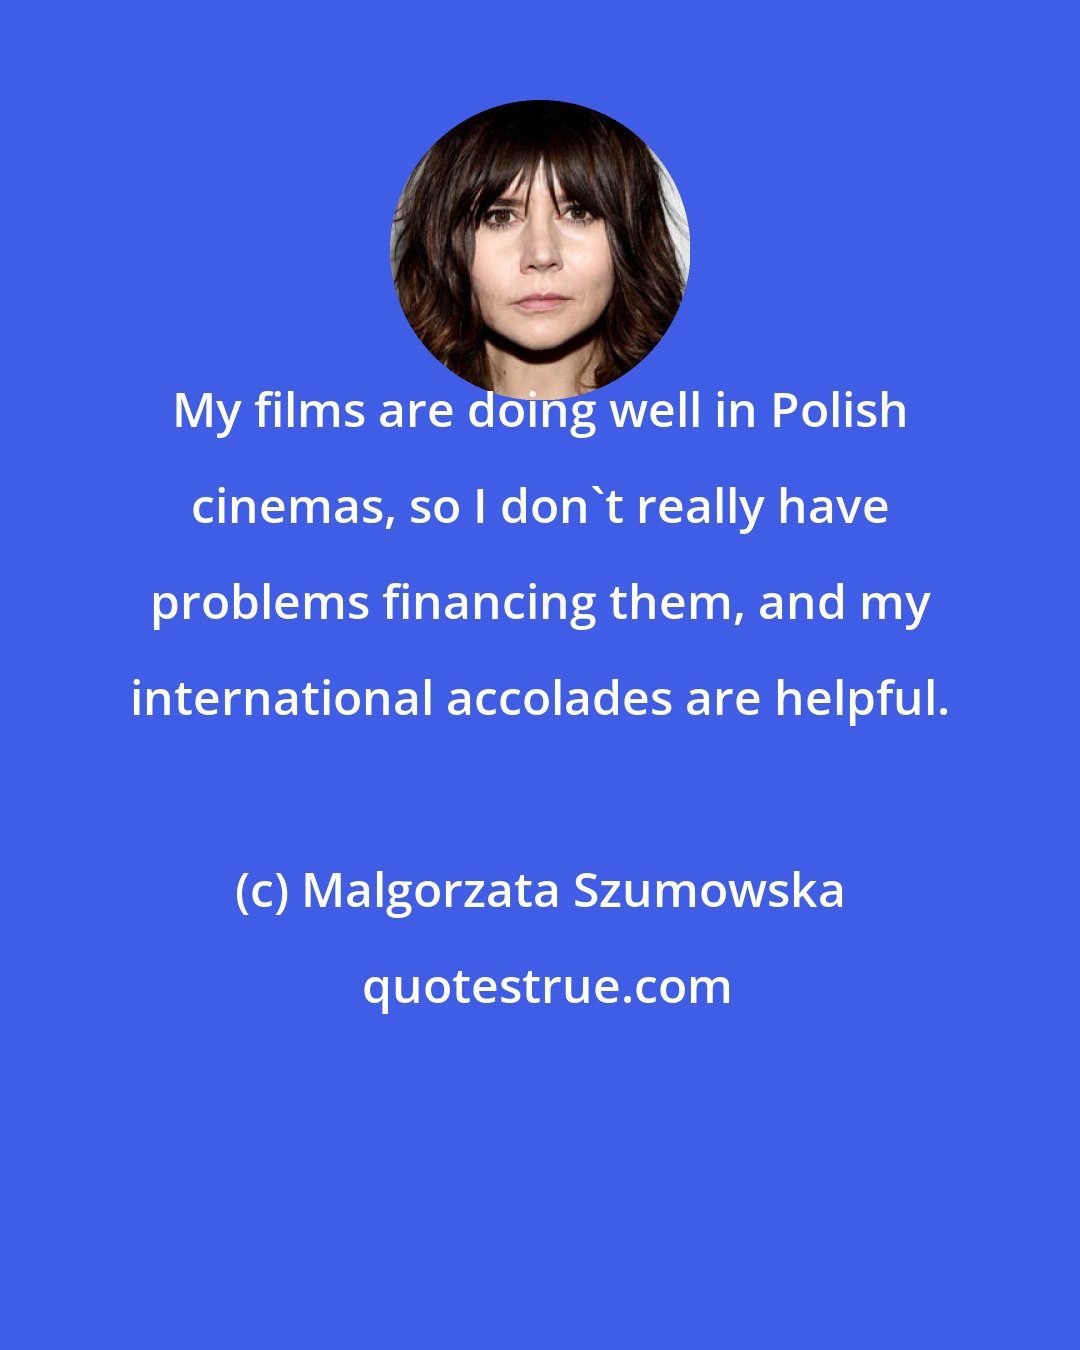 Malgorzata Szumowska: My films are doing well in Polish cinemas, so I don't really have problems financing them, and my international accolades are helpful.